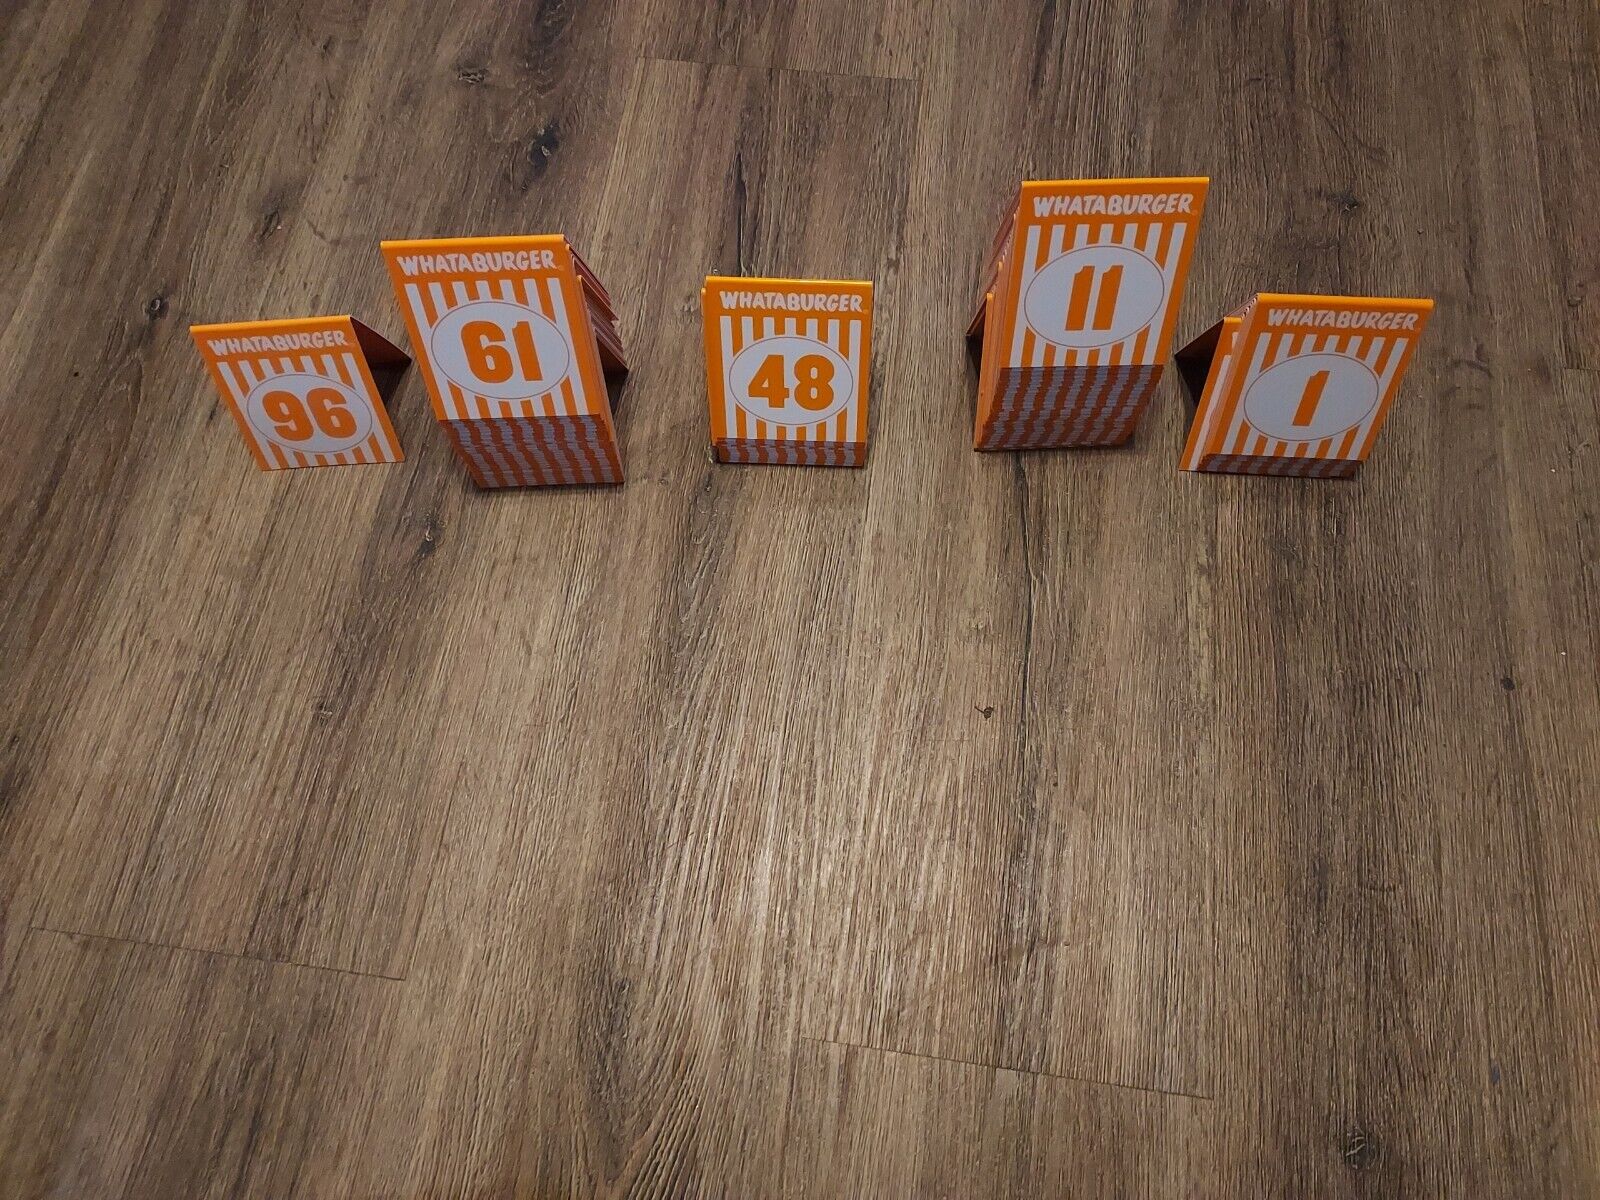 Whataburger Table Tent Markers - Individual Restaurant Order Numbers